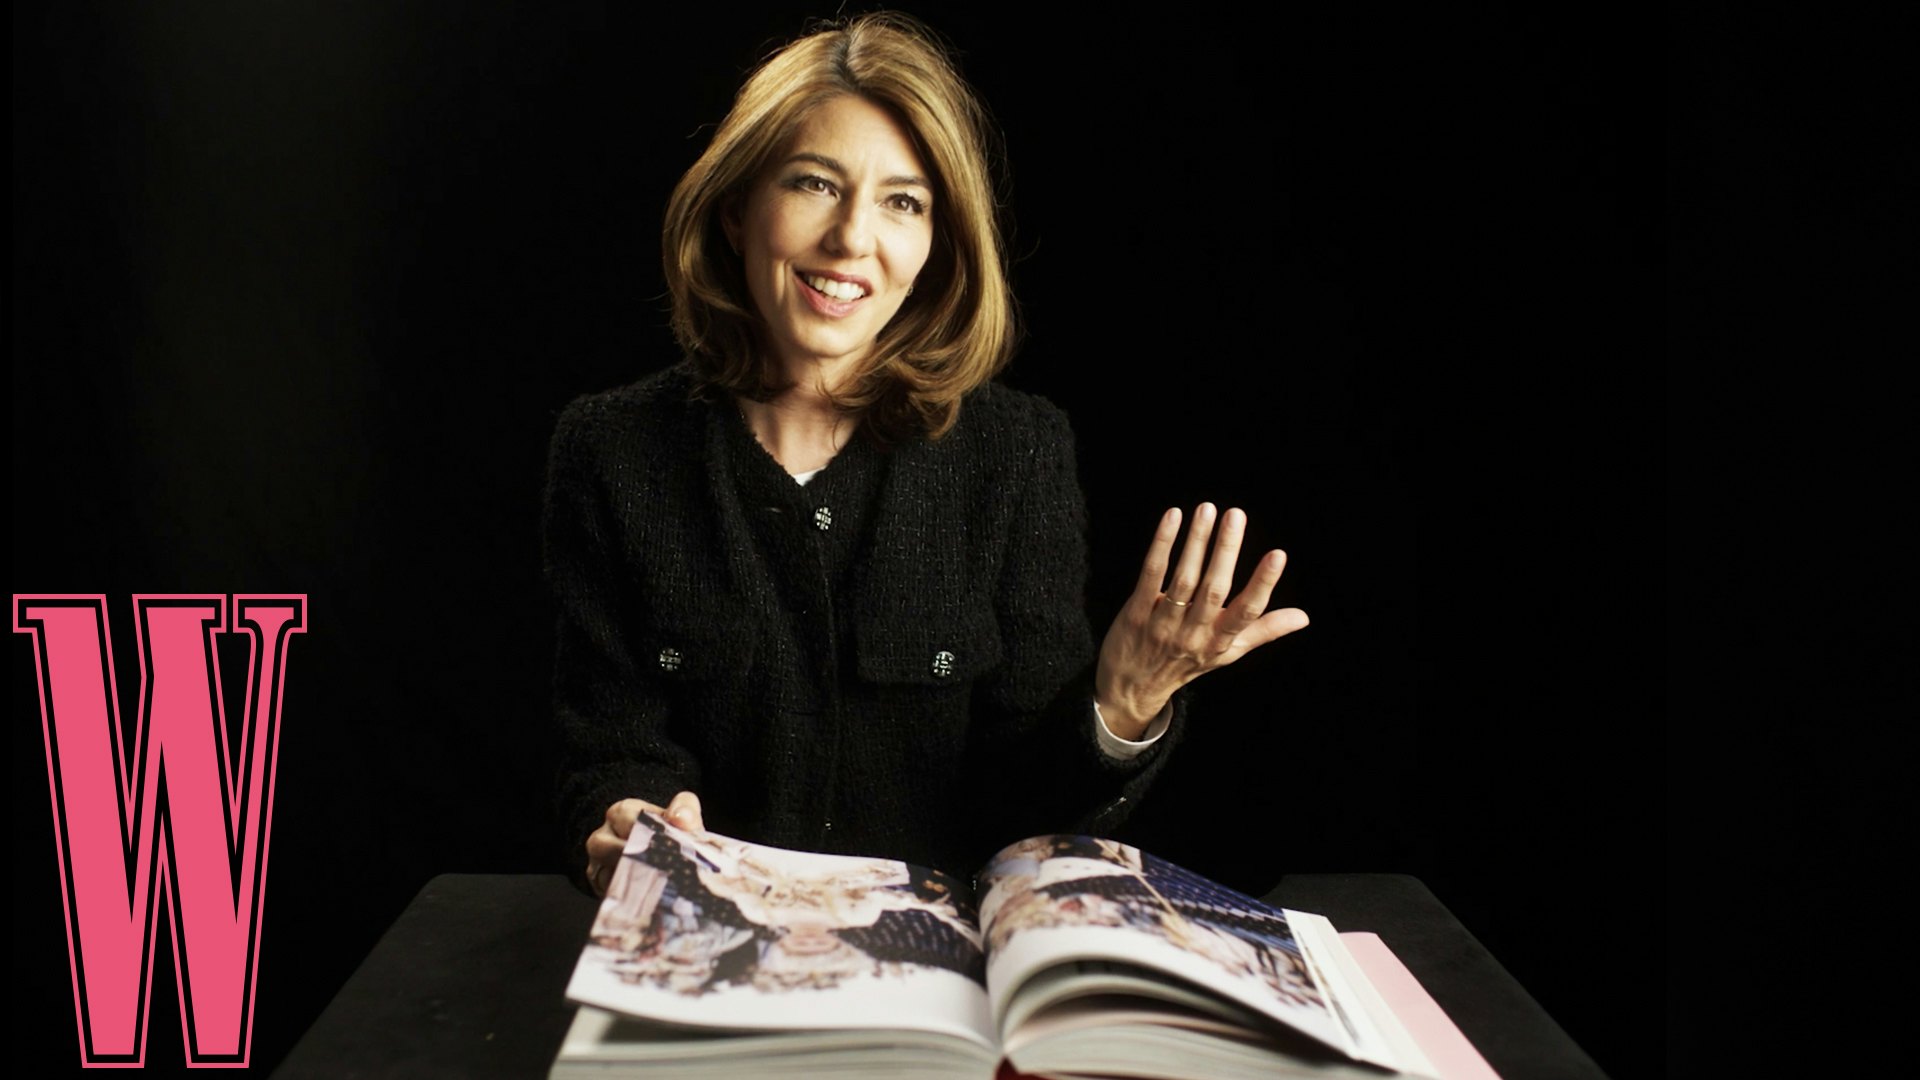 Lost In Film on X: Sofia Coppola will release her first book next  September. 'Sofia Coppola Archive' will feature behind-the-scenes and  on-set footage from her entire filmography. We cannot wait to read